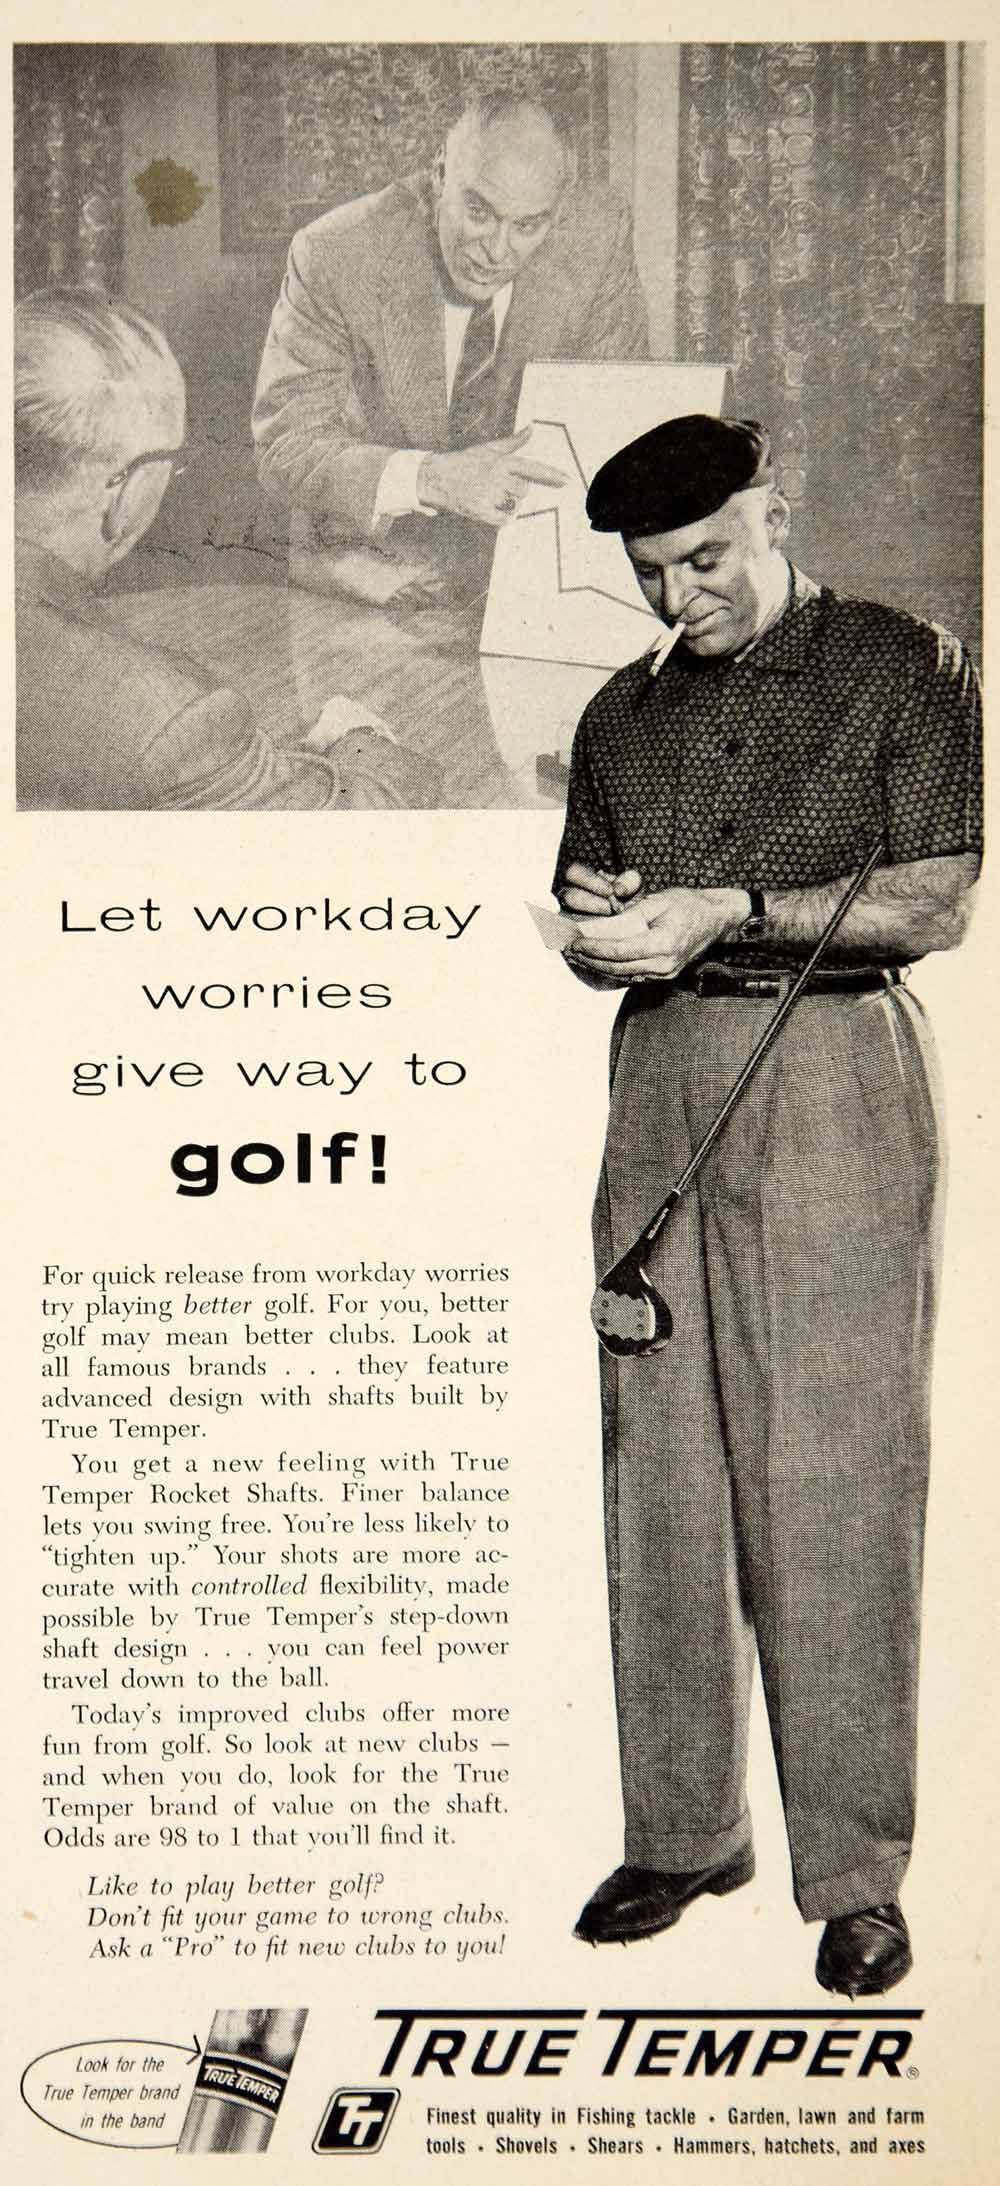 1957 Ad True Temper Rocket Shafts Golf Clubs Sporting Goods Workday Worries YGM1